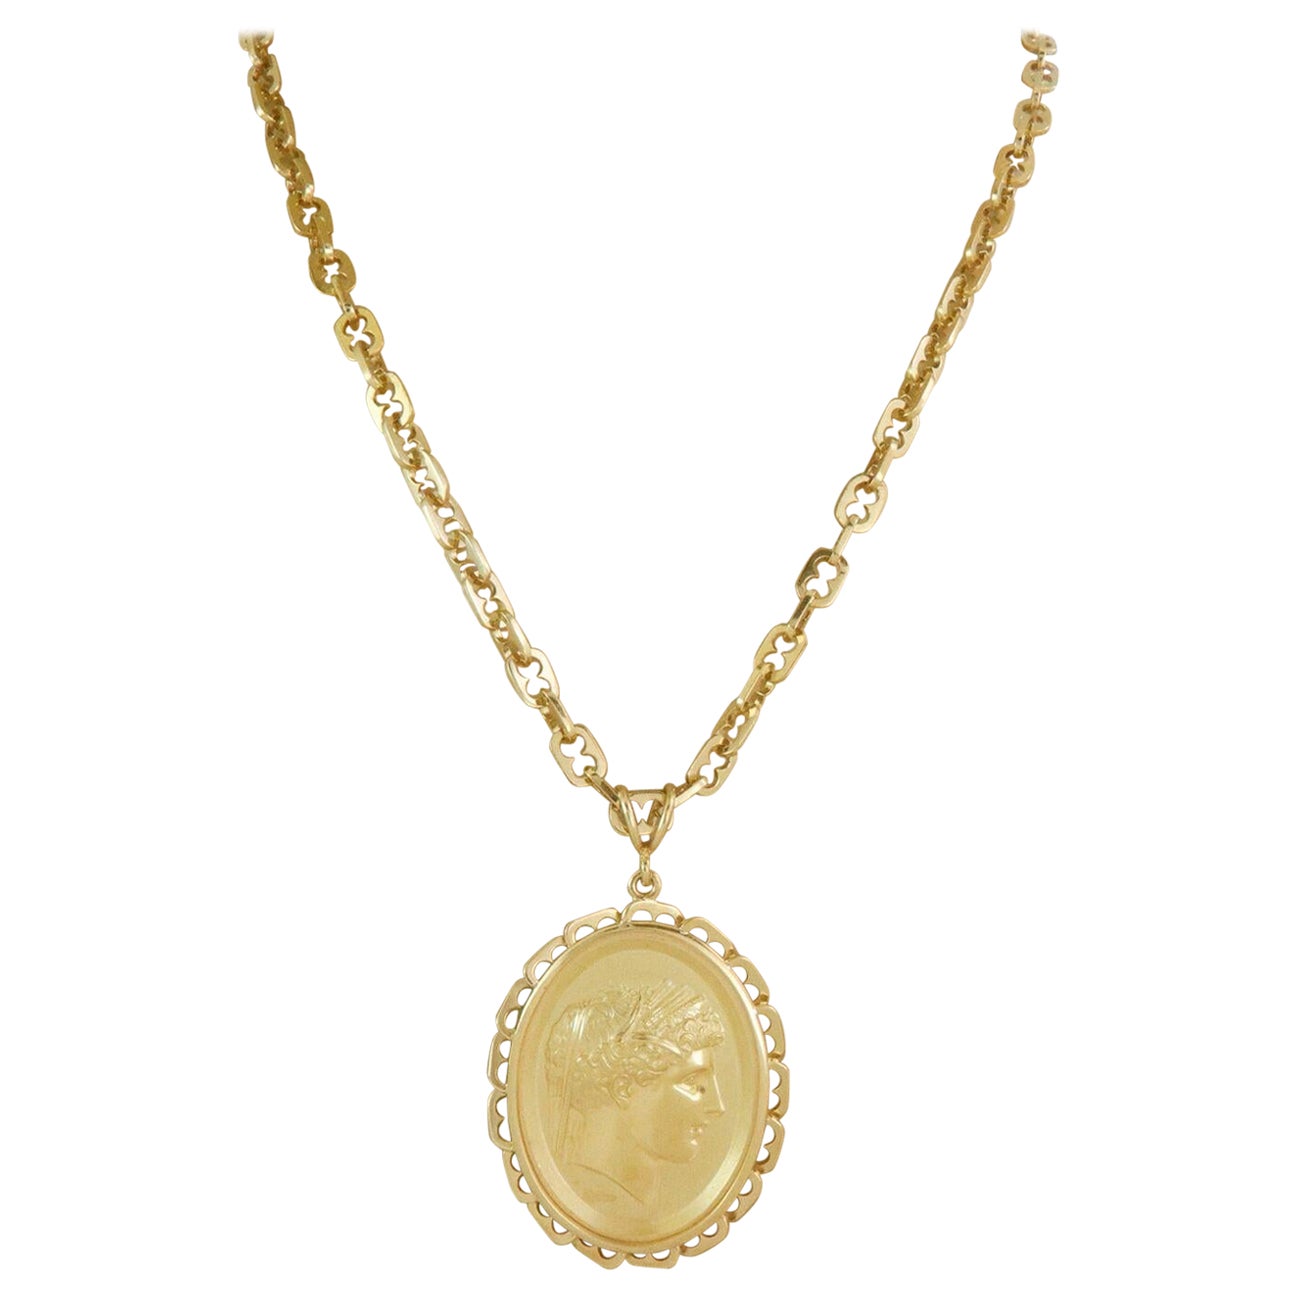 Wachler Signed 18k Yellow Gold Embossed Woman Cameo Oval Pendant Necklace